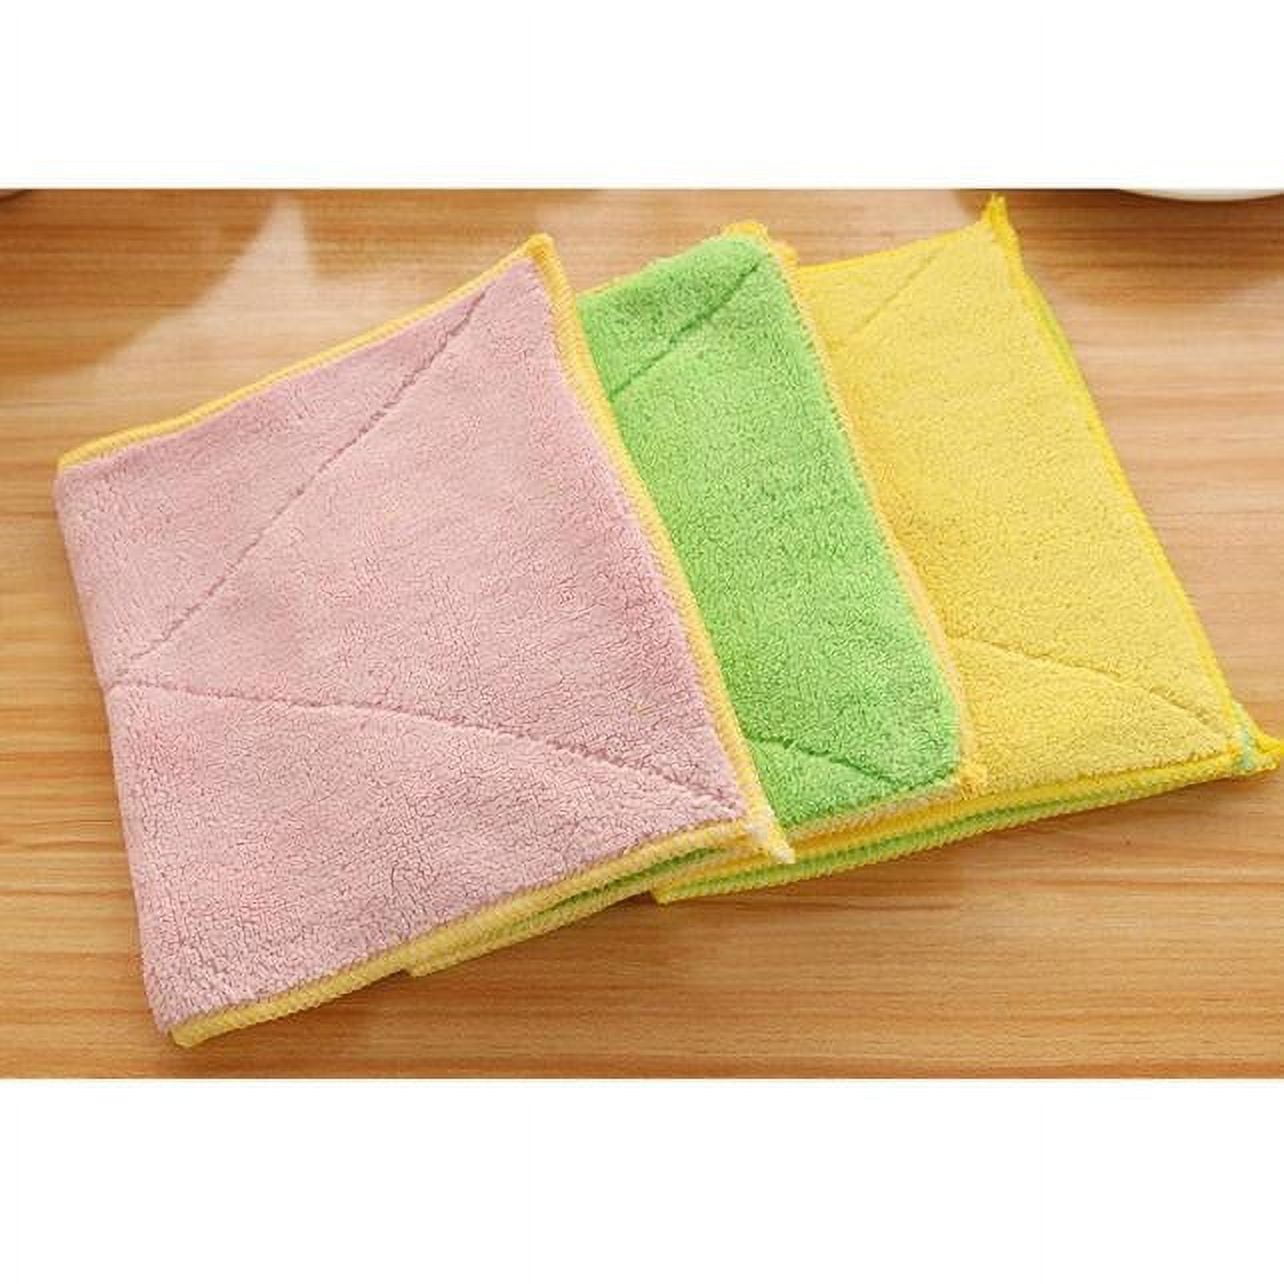 LYUCRAZ Cleaning Cloths Mixed Color Microfiber Car Cleaning Towel ...